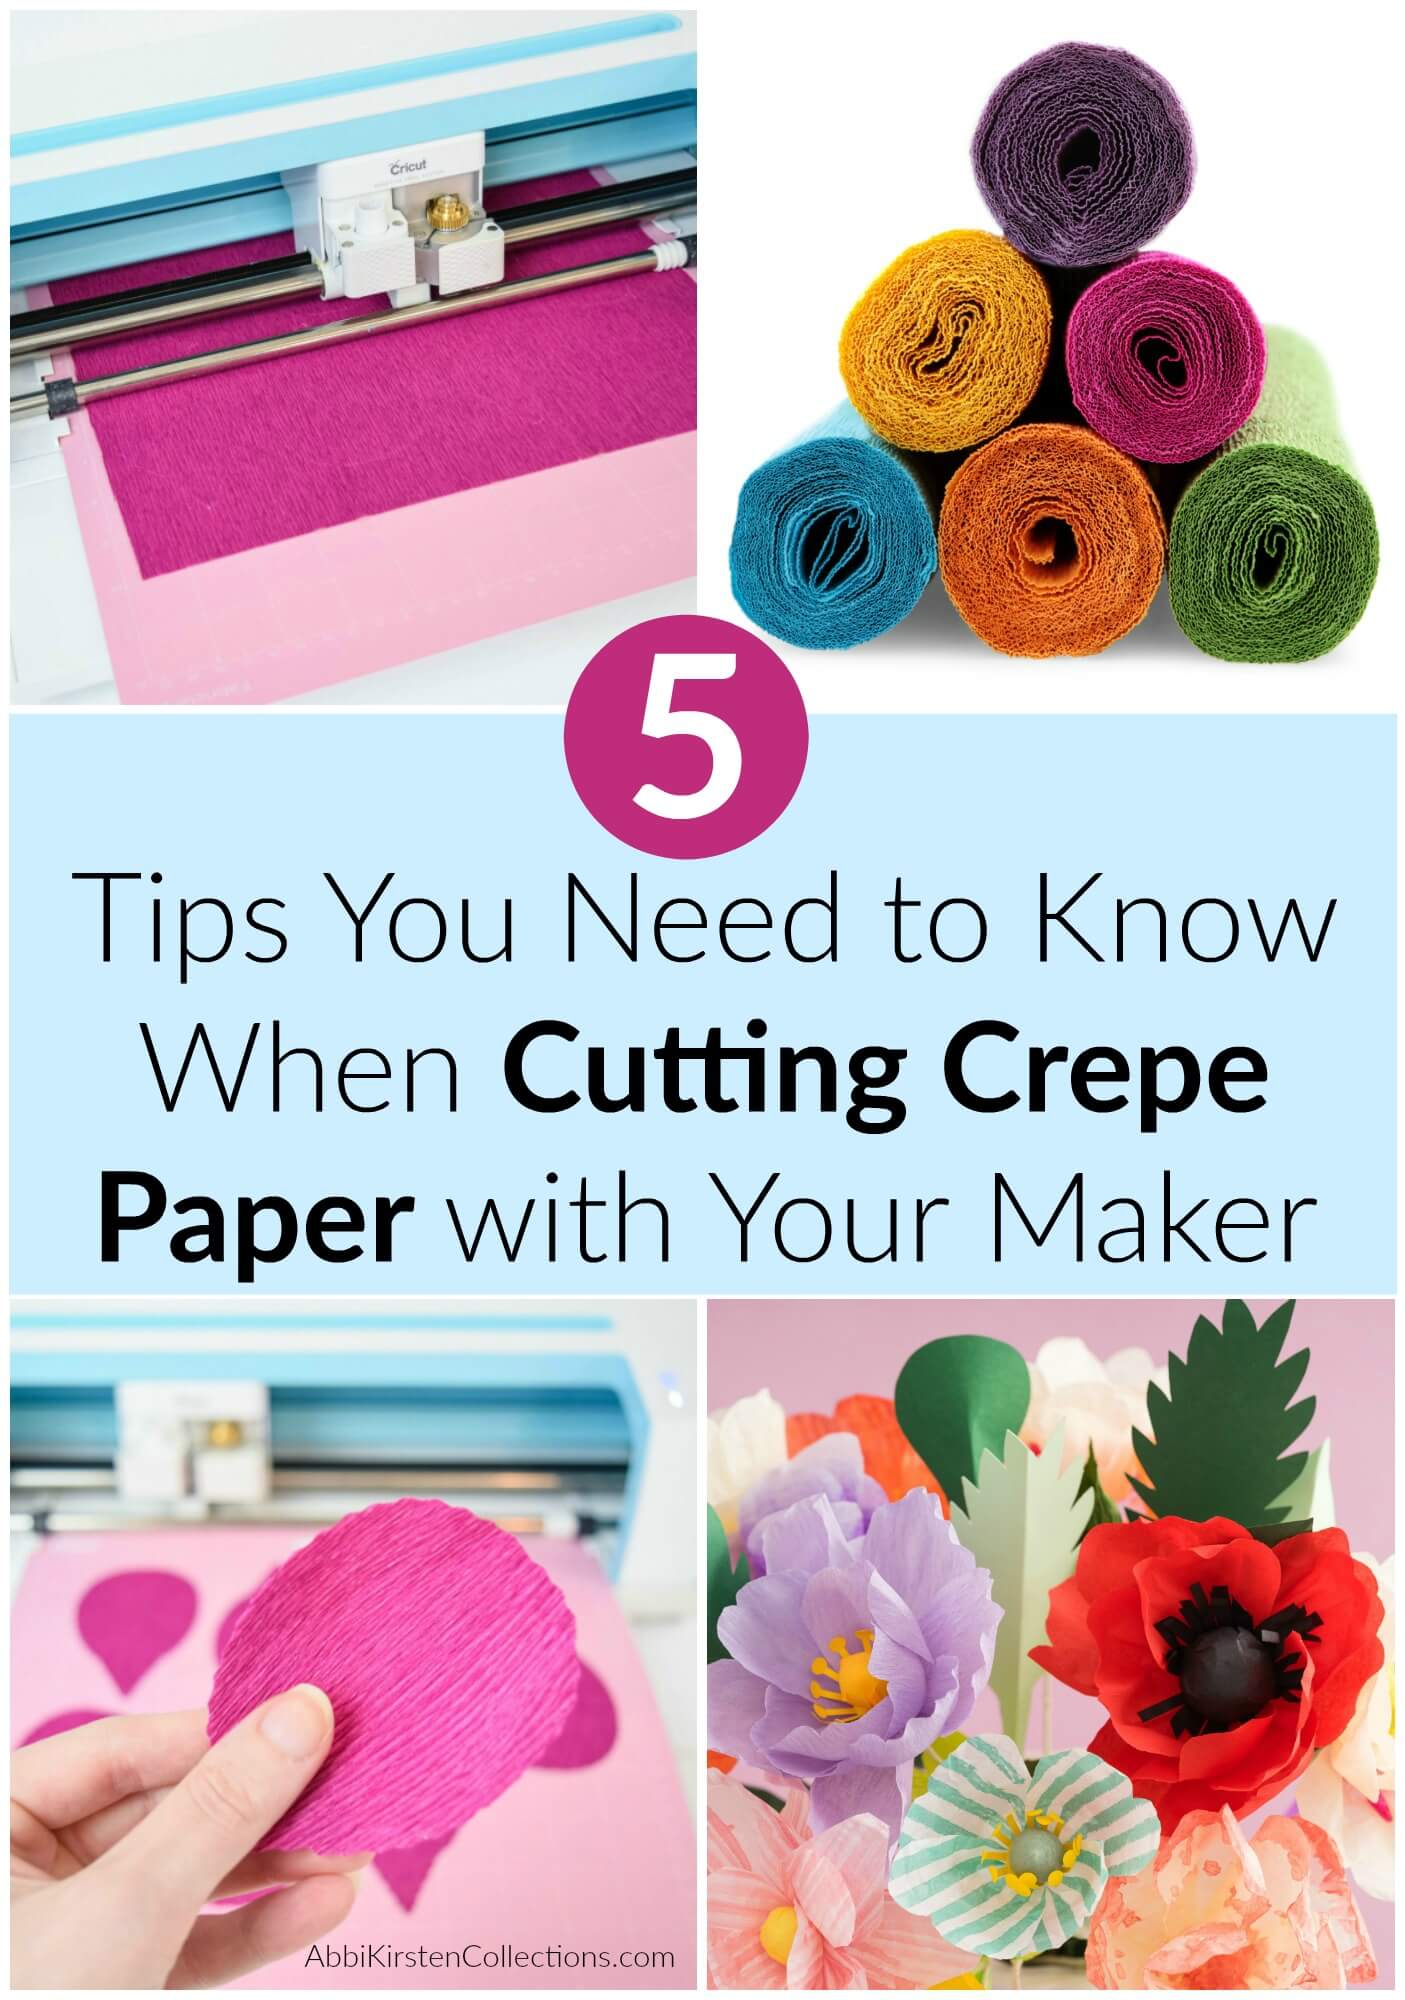 A Simple Guide to Using Cricut Cutter Story - Abbi Kirsten Collections